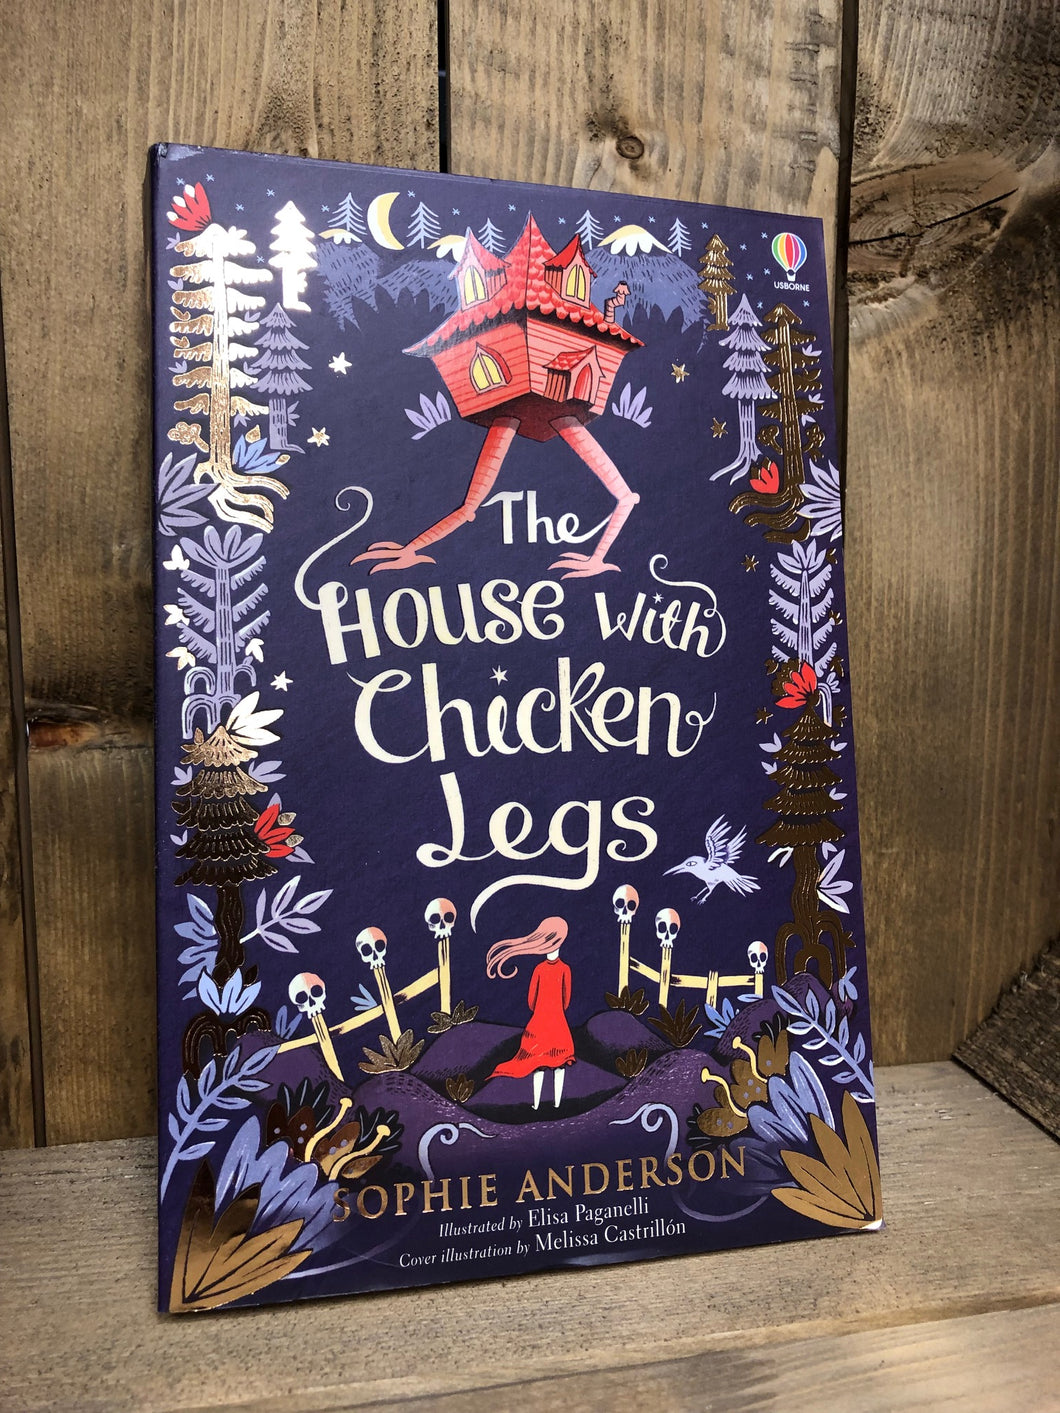 Image of the paperback book The House with chicken Legs with a purple cover illustrated with a border of trees and a girl standing by a fence with skulls on the top and a house with chicken legs at the top of the cover.